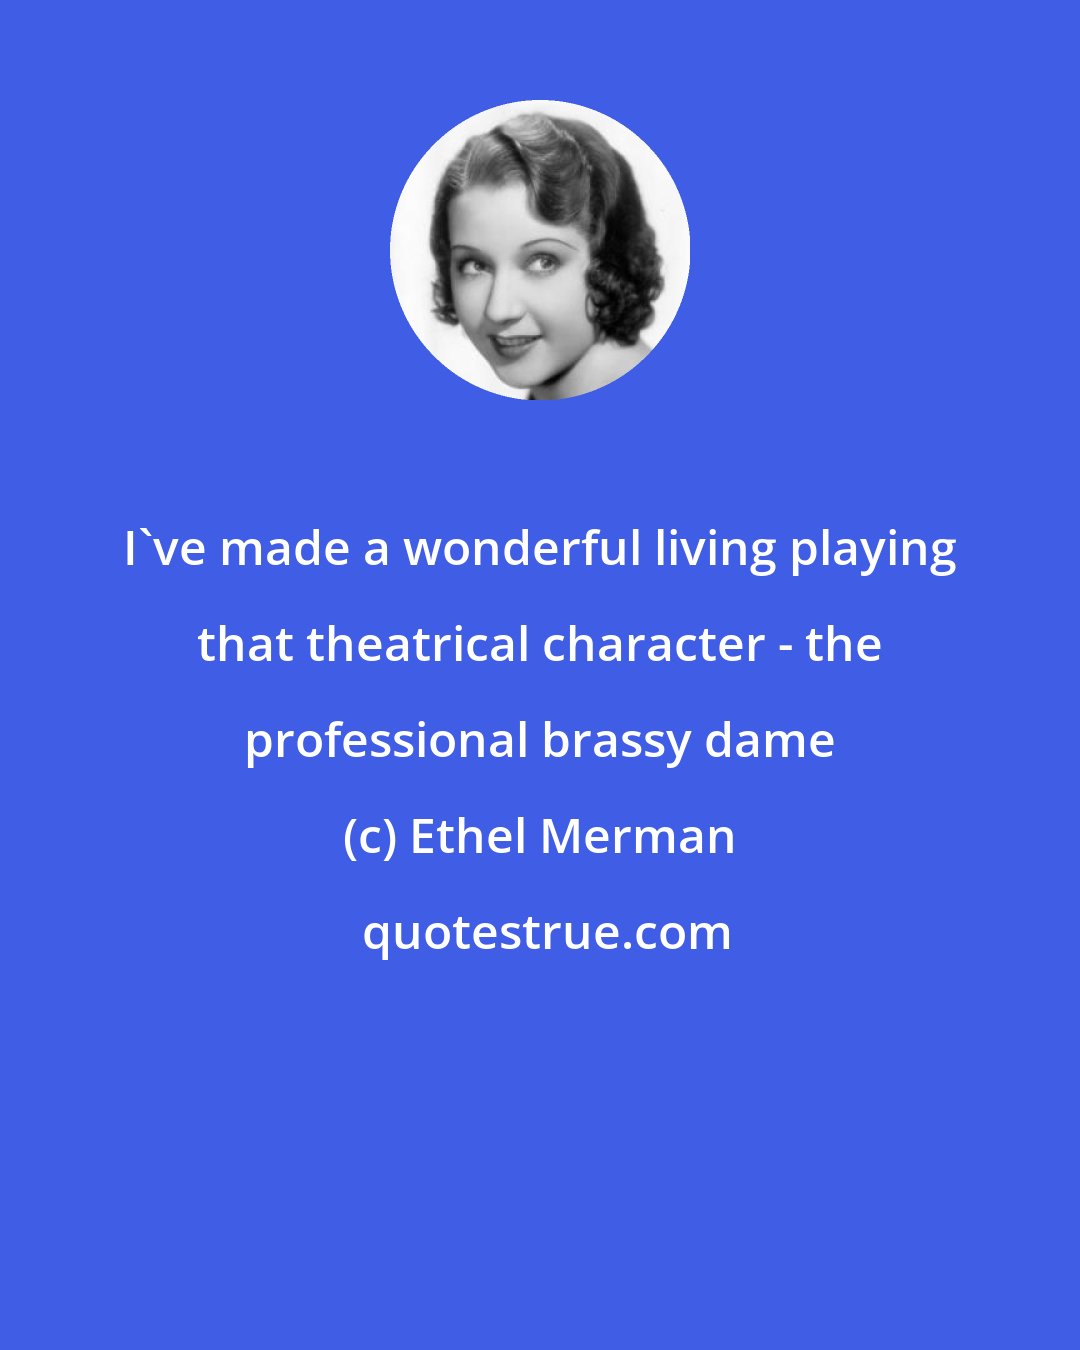 Ethel Merman: I've made a wonderful living playing that theatrical character - the professional brassy dame